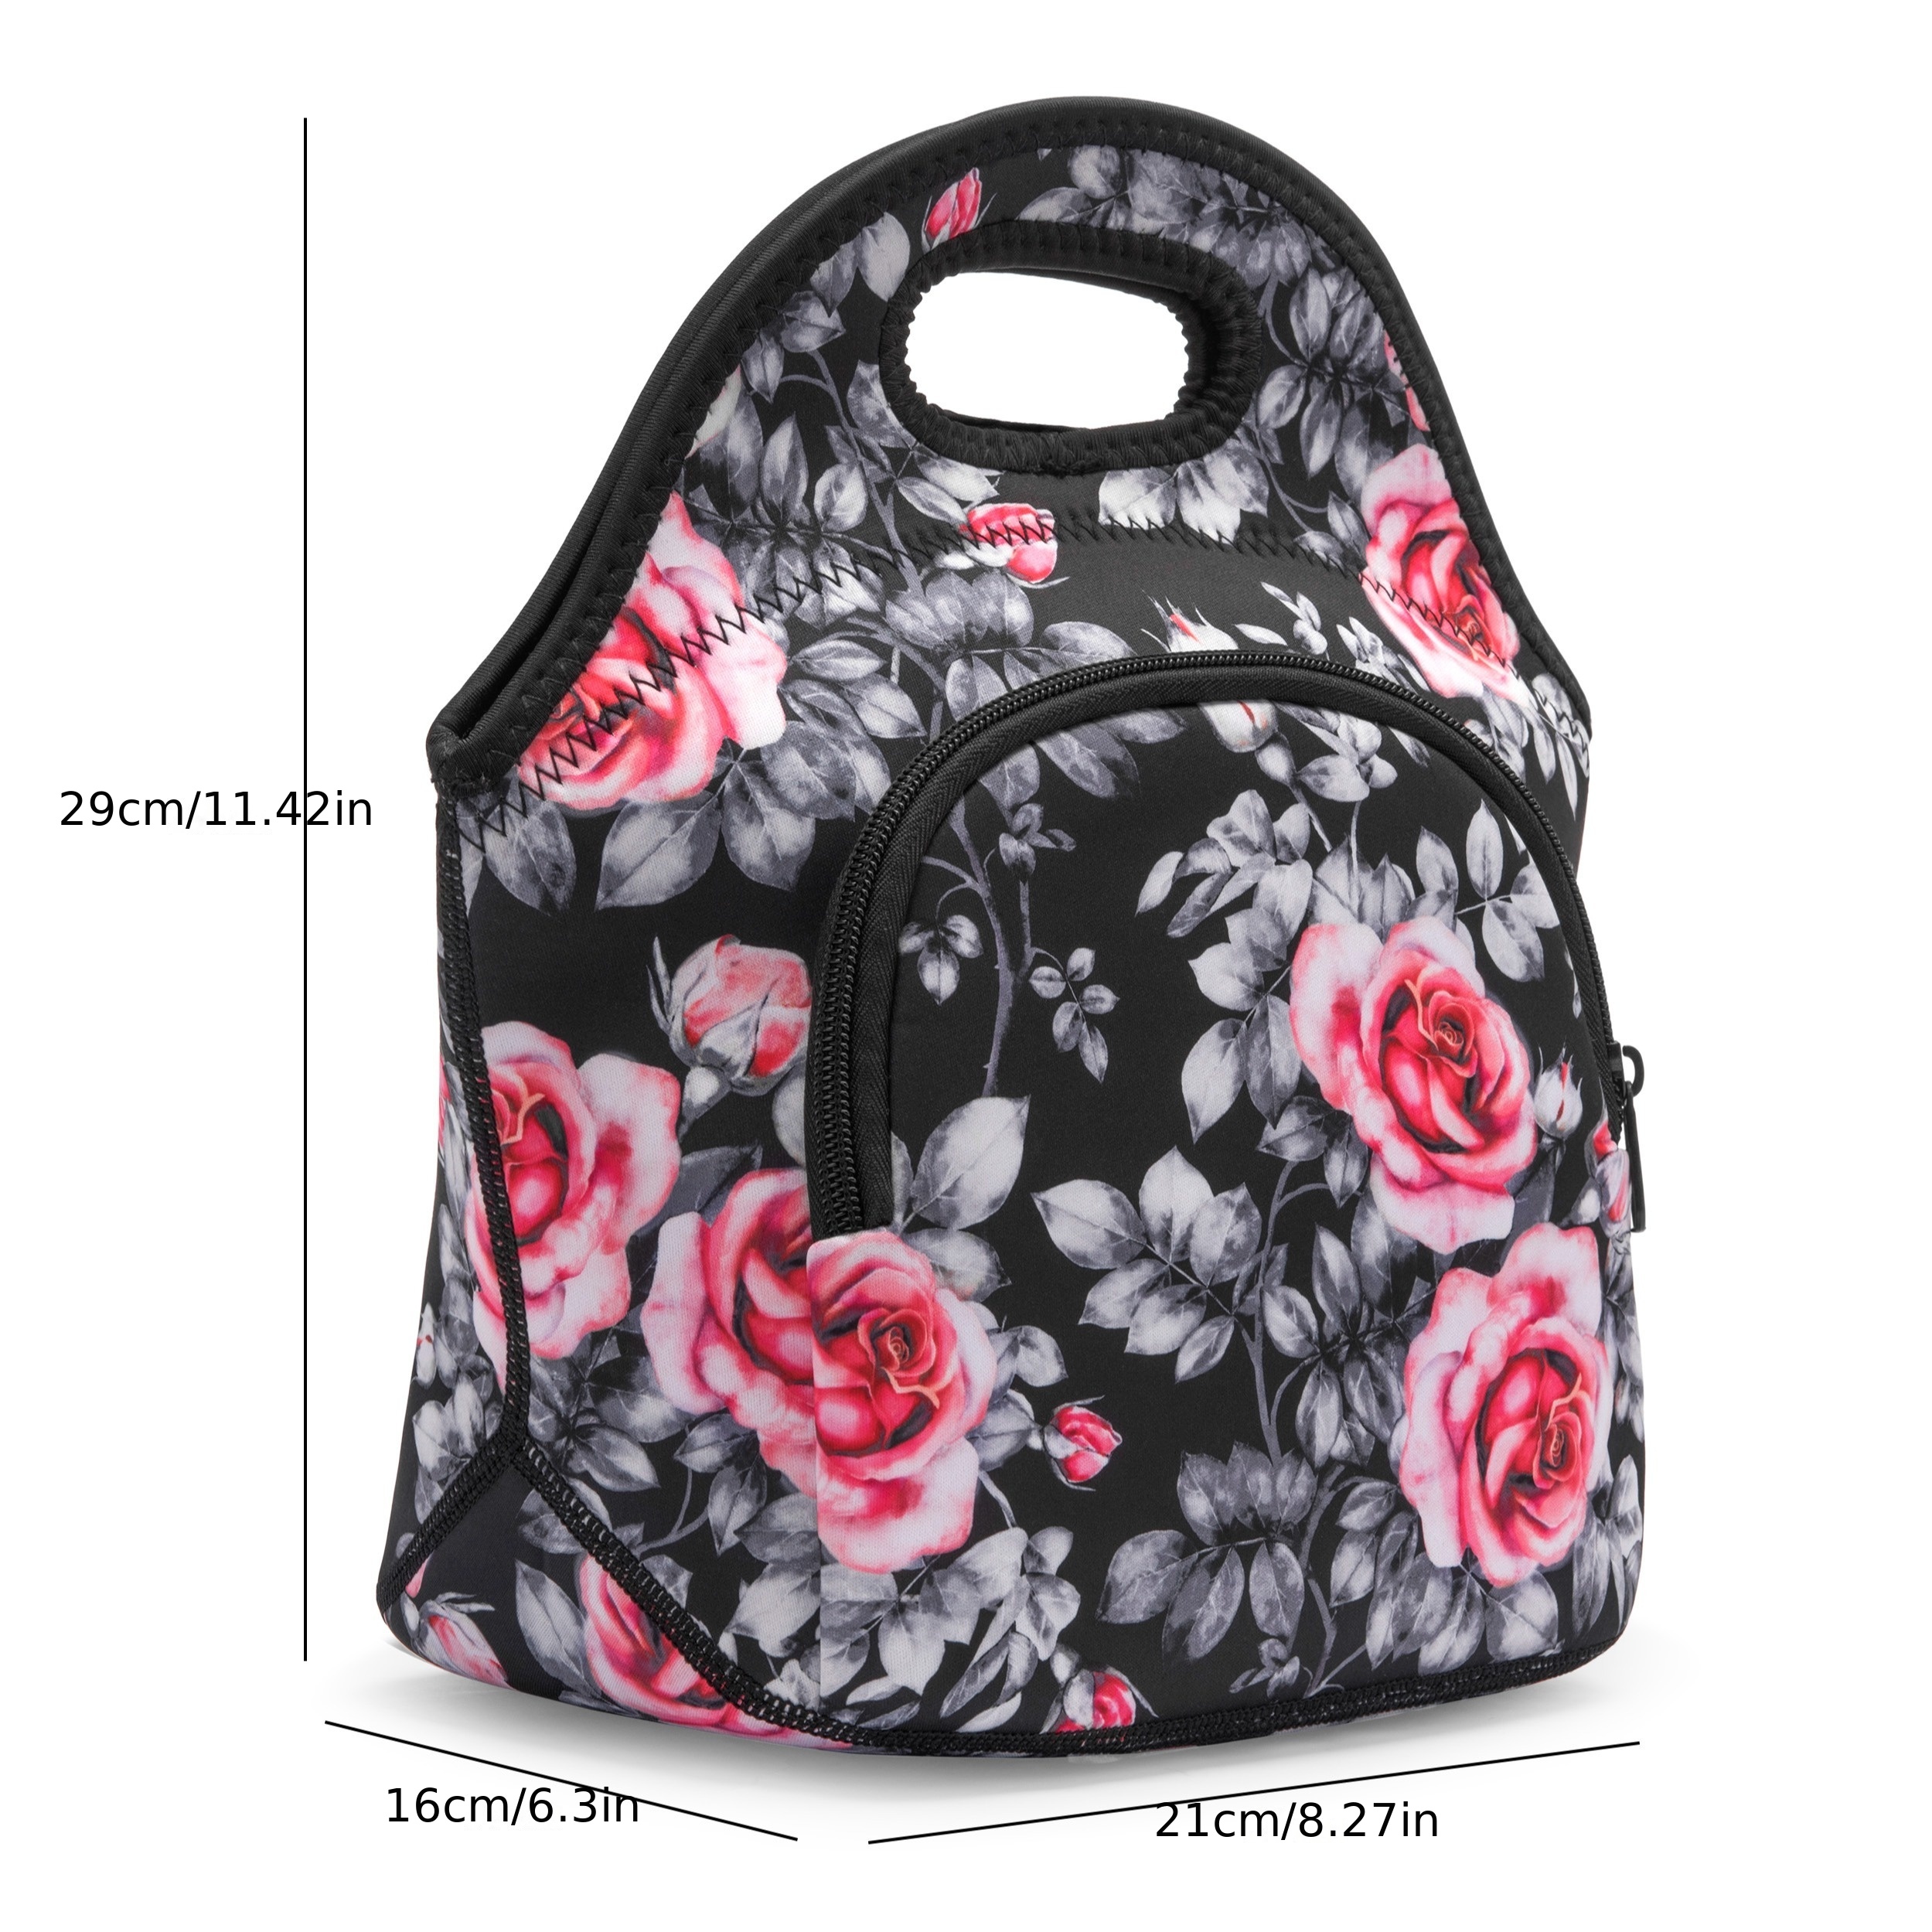 Bungalow Rose Reusable Insulated Thermal Lunch Bag Cute Lunch Box For Teens  Boys Girls Adult Women Work School Outdoor Travel Picnic Beach BBQ Party